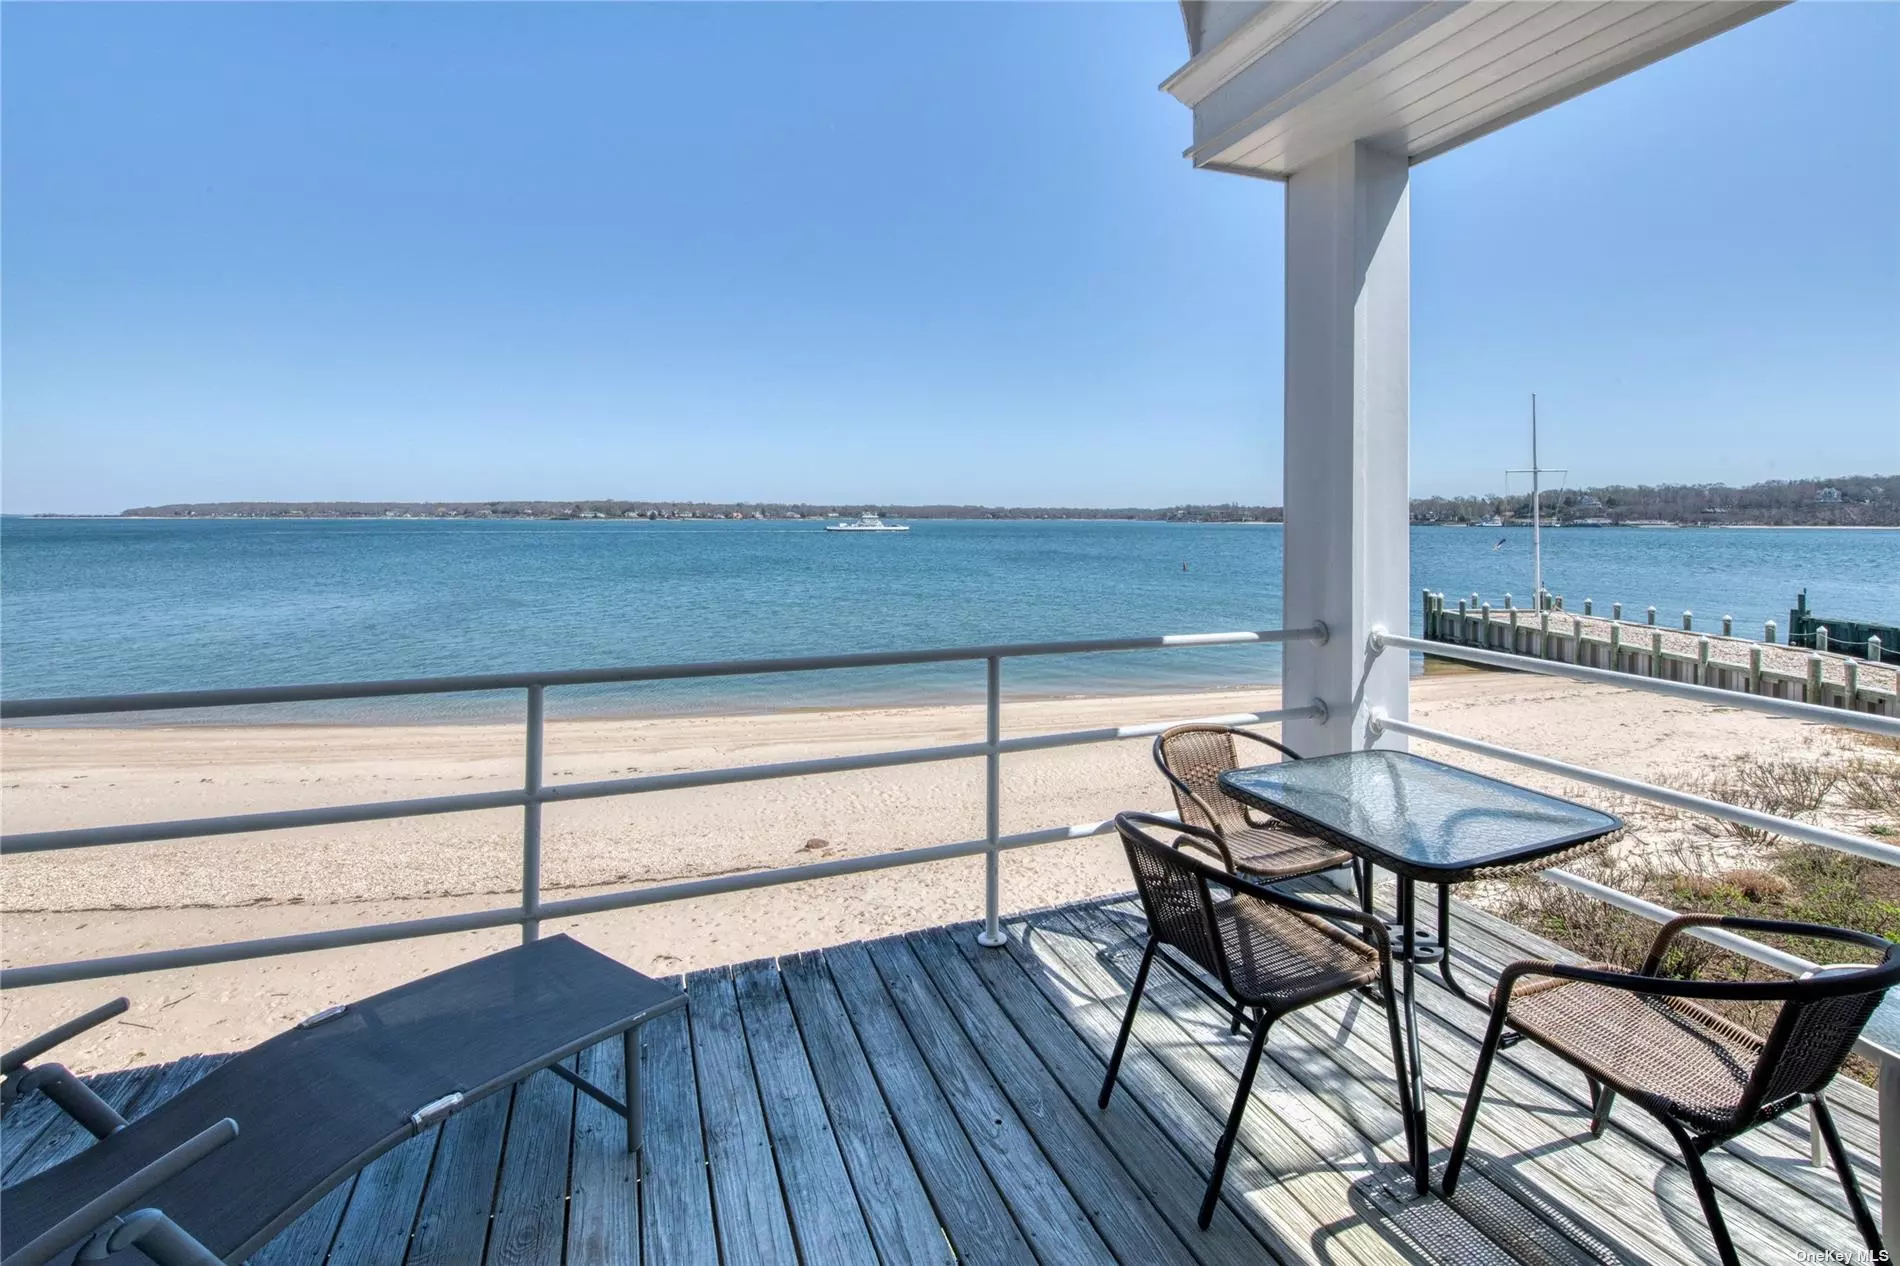 Newly Renovated Unit W/Spectacular Views Of Bay, Beach & SI Beyond. 2 Bed/ 2 Bath. Styled Elegantly. Open Plan W/ Views From Every Window. Waterfront Balcony On Beach. Complex has a Waterfront Pool, Tennis & Pickle Ball Court & Over 200 Ft of Bay Beach. Rental Includes a Boat Slip in Marina. In Heart Of Village. Close To Restaurants, Transportation, Ferry & Shops. (Southold Town Rental Permit #21-063) Rented for Summer 2024.